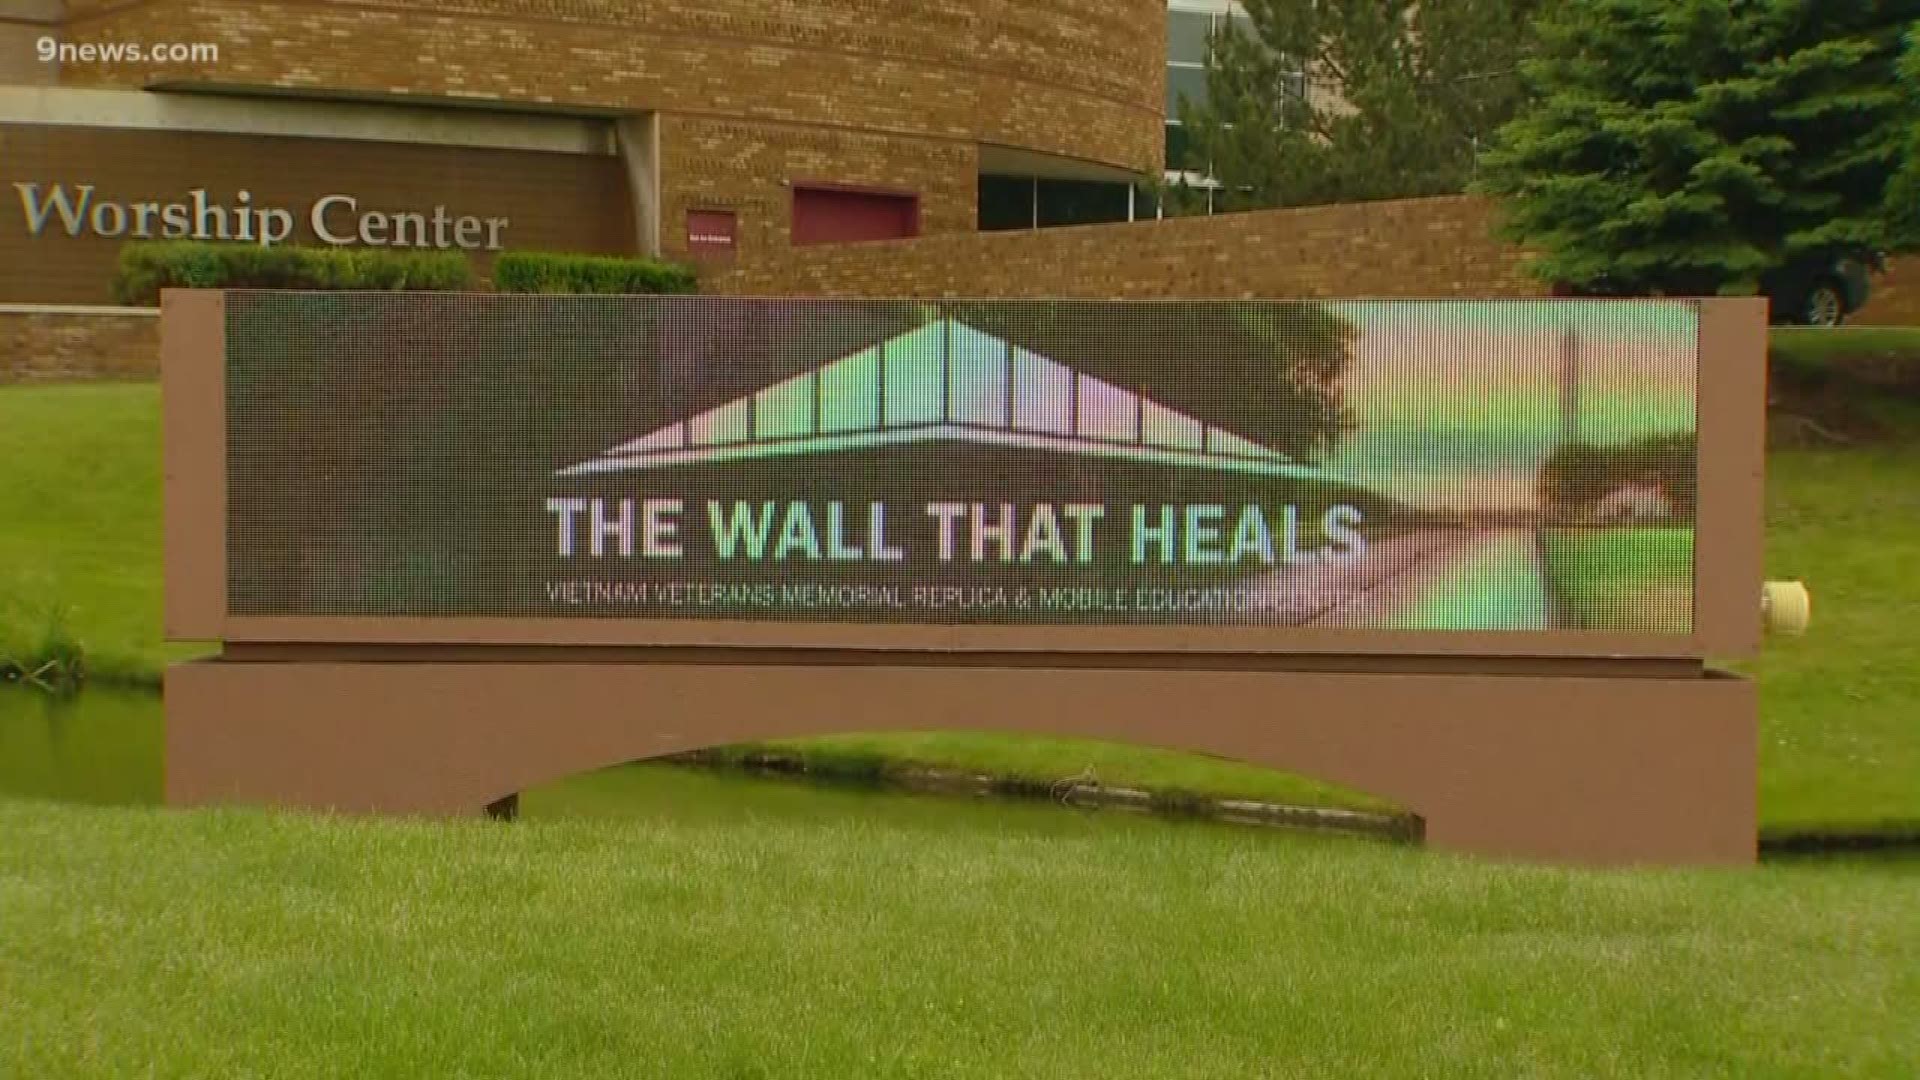 The Wall That Heals features the names of more than 58,000 servaice members who died in the Vietnam War.